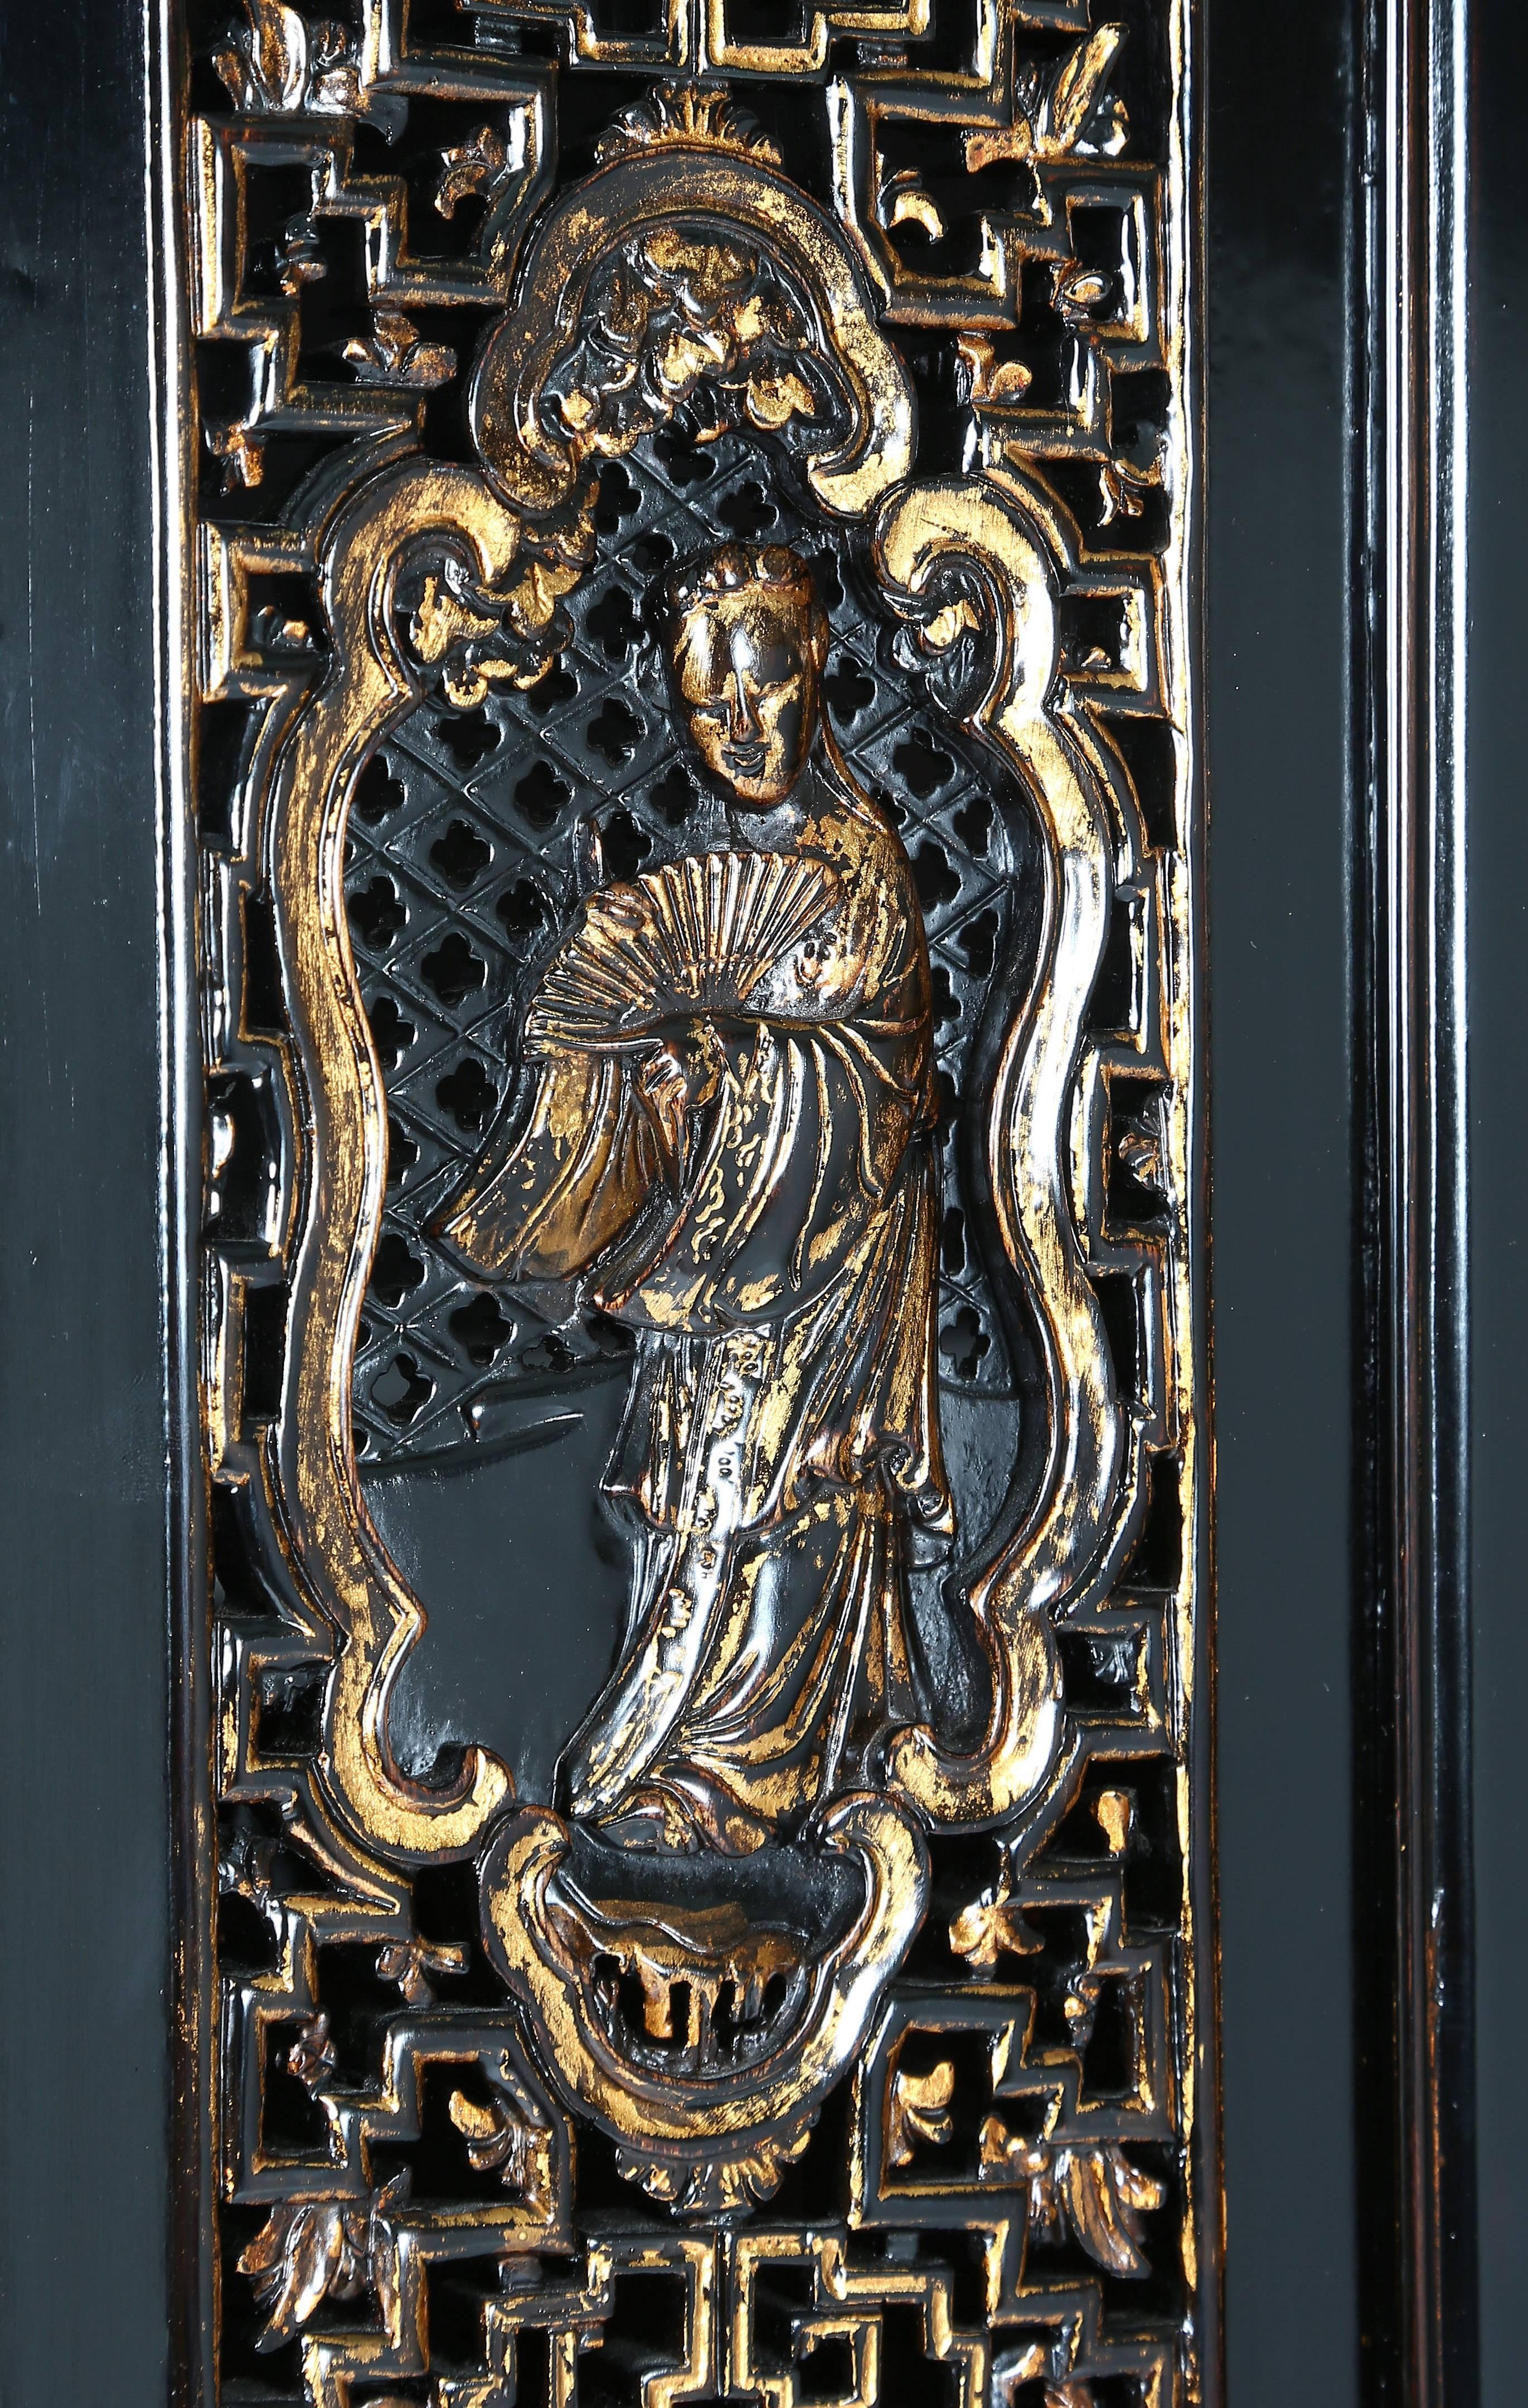 The fine cabinet decorated with gilt open-carved panels of figures above plain panels on the four bi-fold doors, above a row of three drawers, the side panels with open geometric fretwork, raised on square-sectioned legs with front cusped spandrels